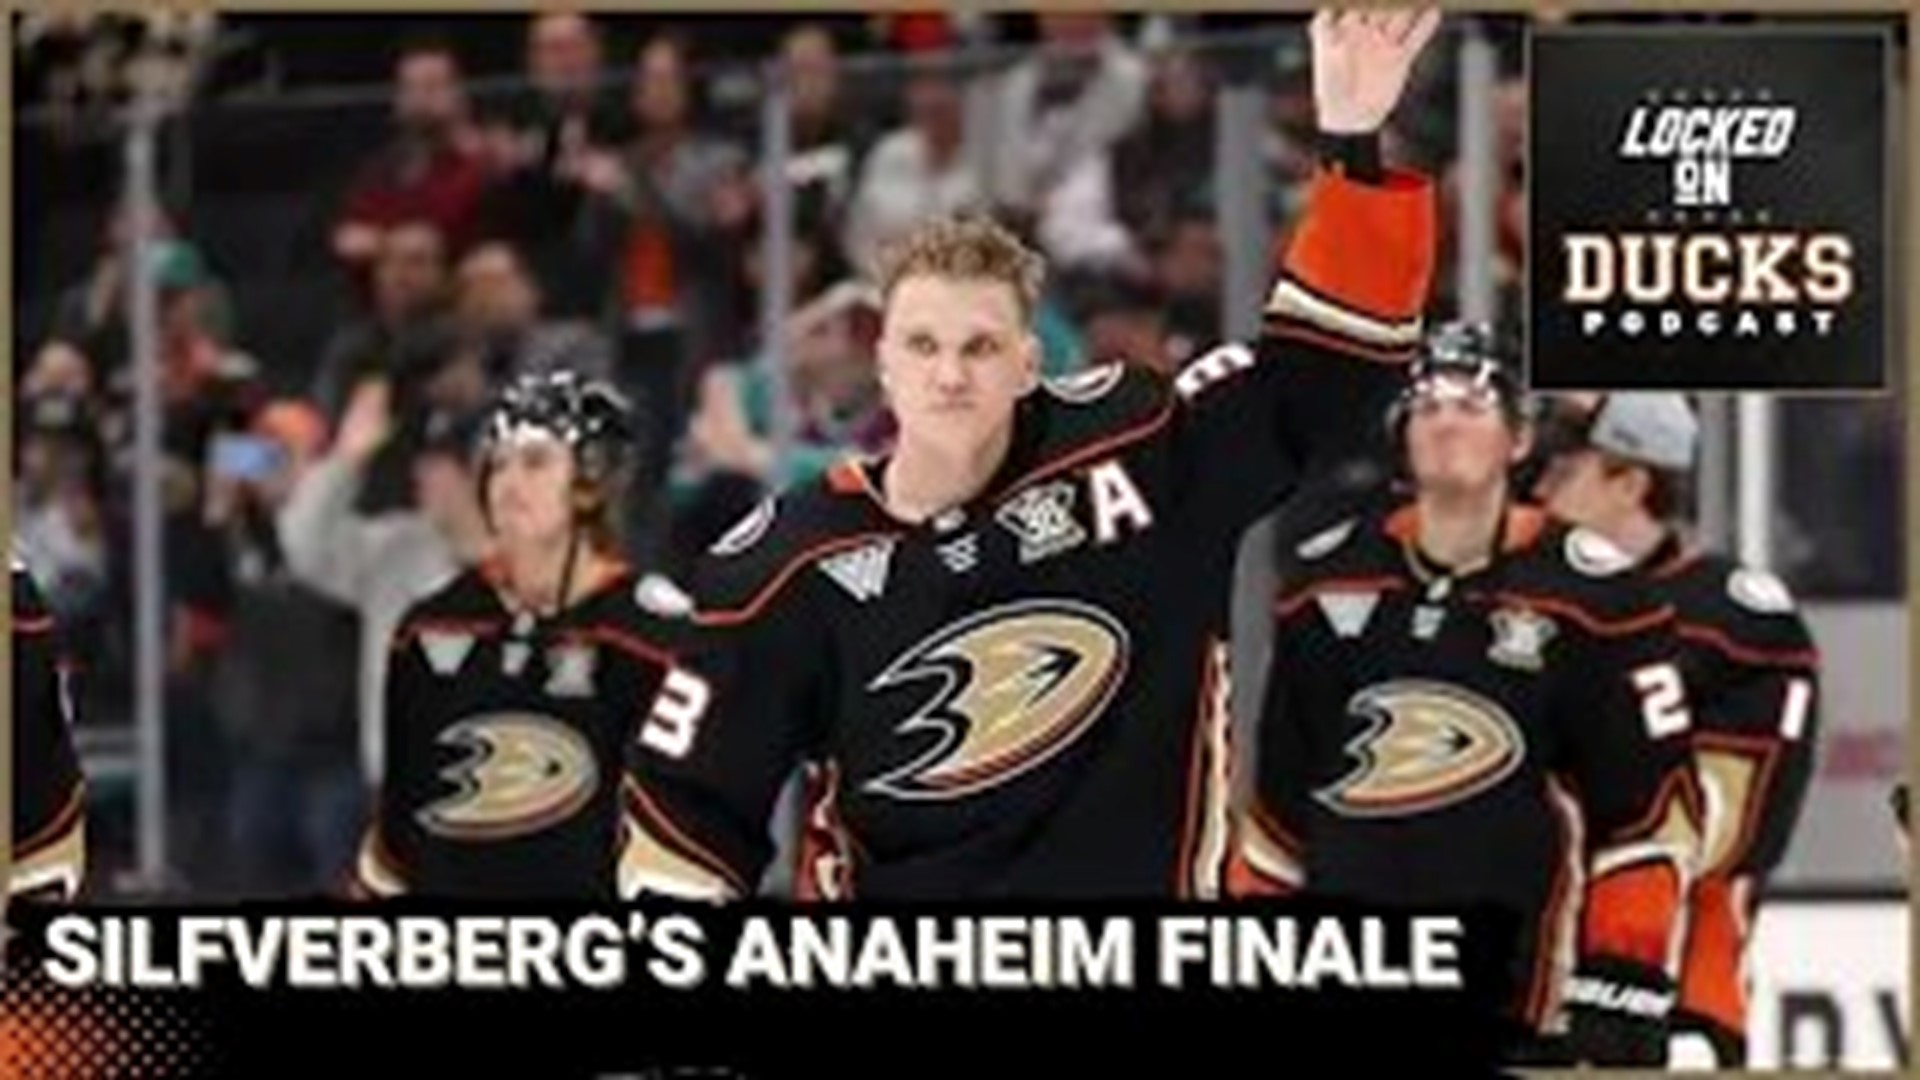 As the season winds down, the NHL career of Jakob Silfverberg comes closer to a conclusion. JD Hernandez gives some quick thoughts on the special night.